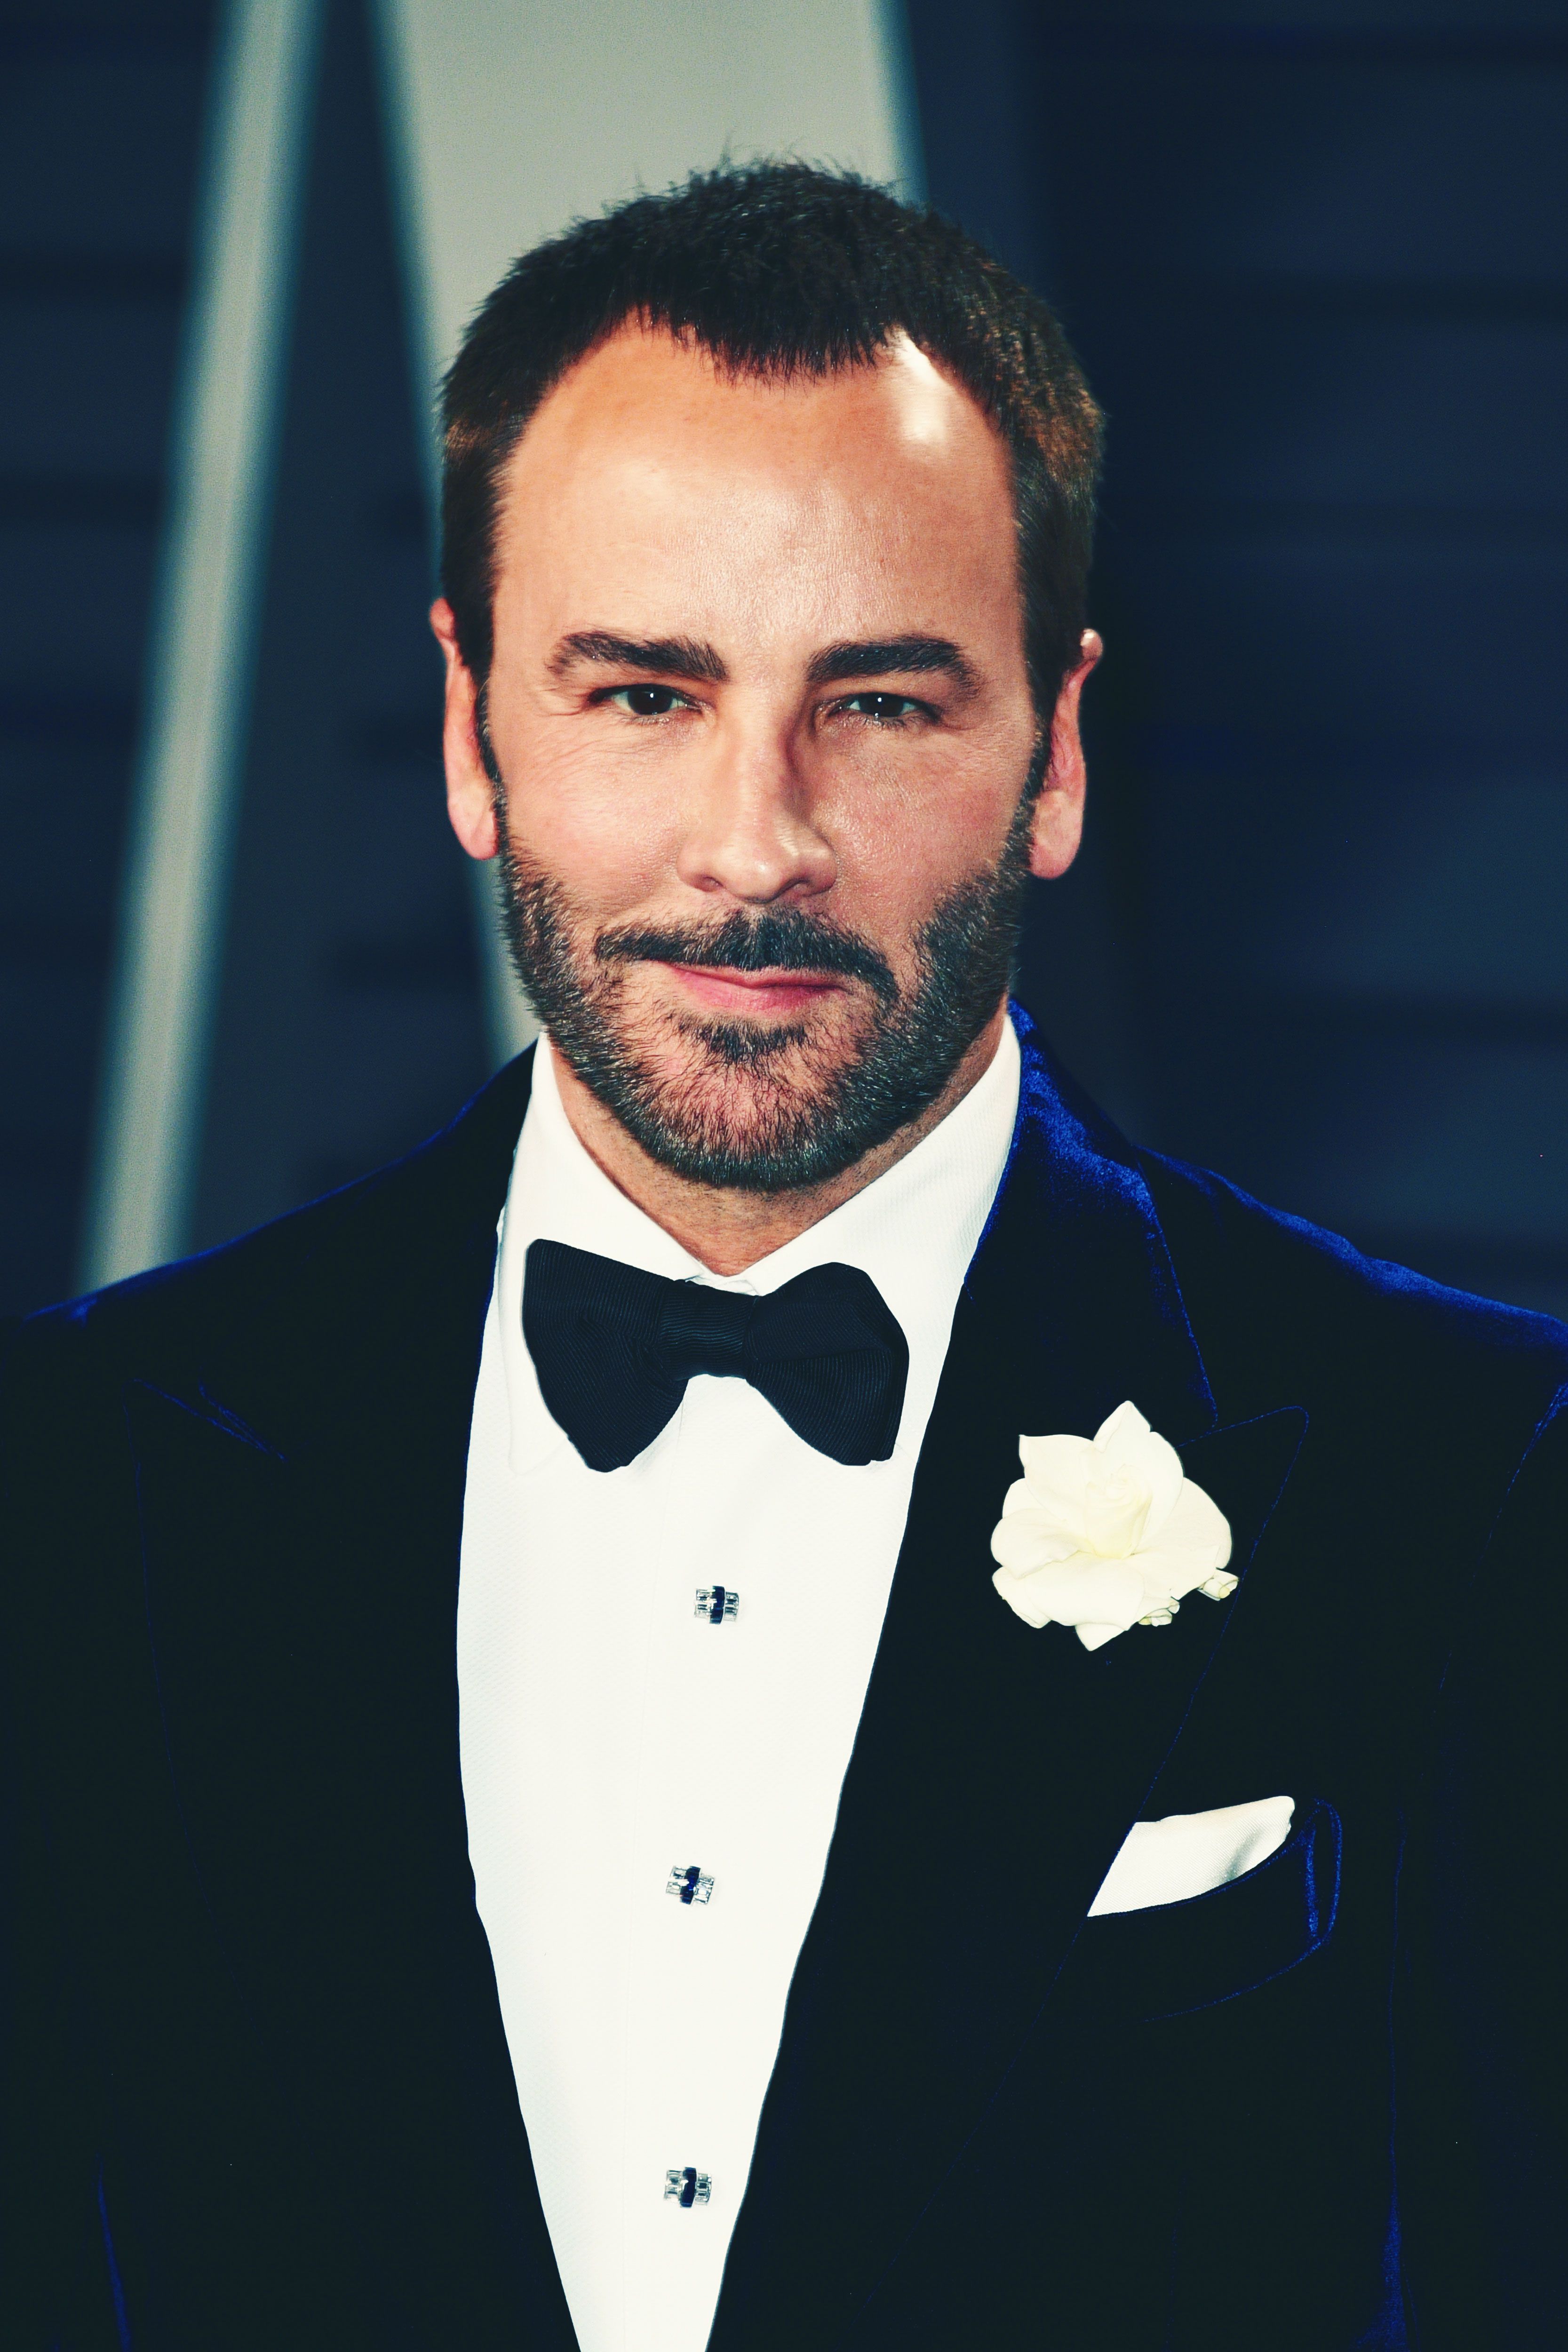 Tom Ford steps down as chairman of CFDA